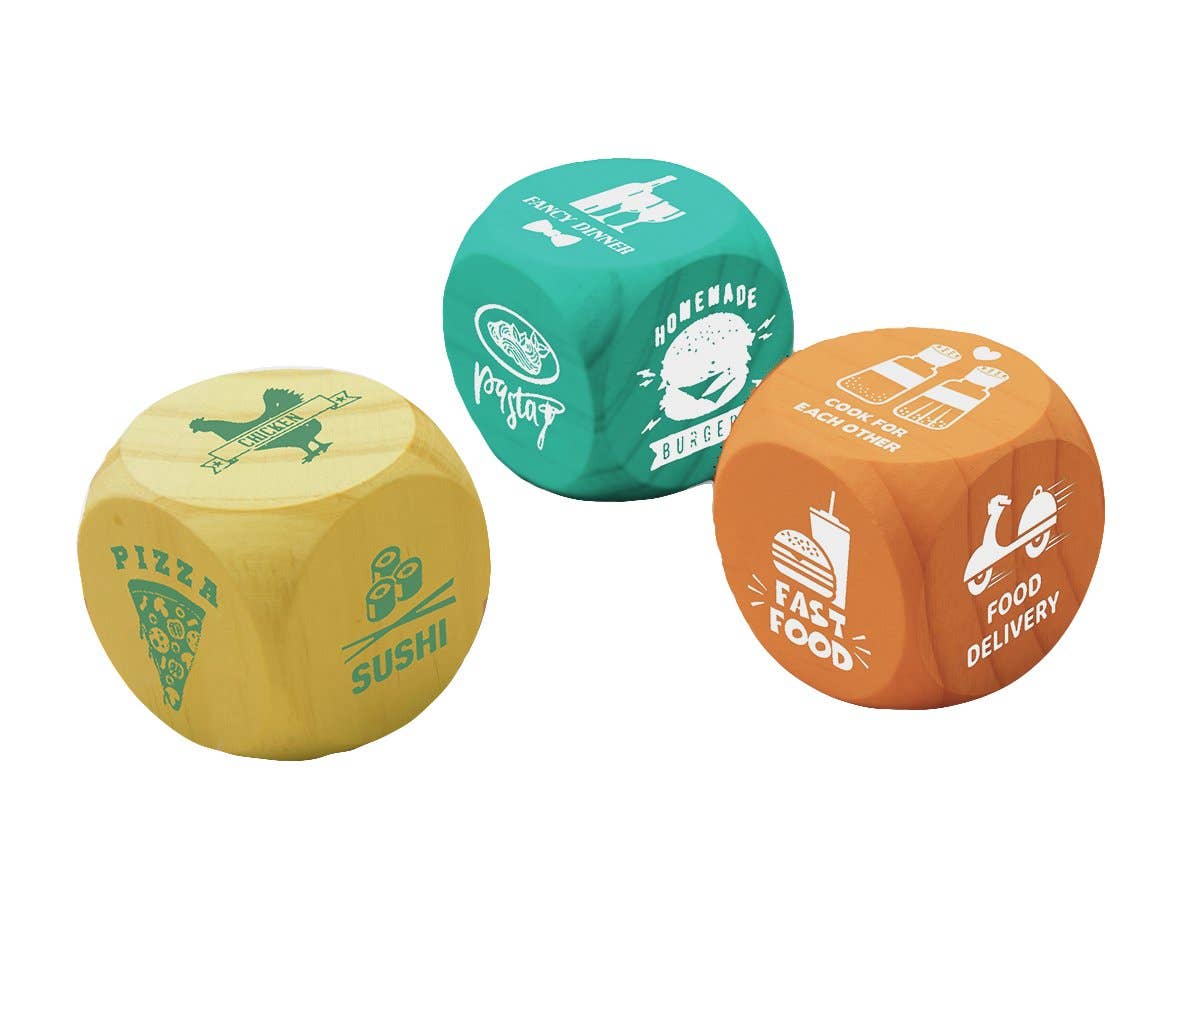 “What to eat” Dice Set